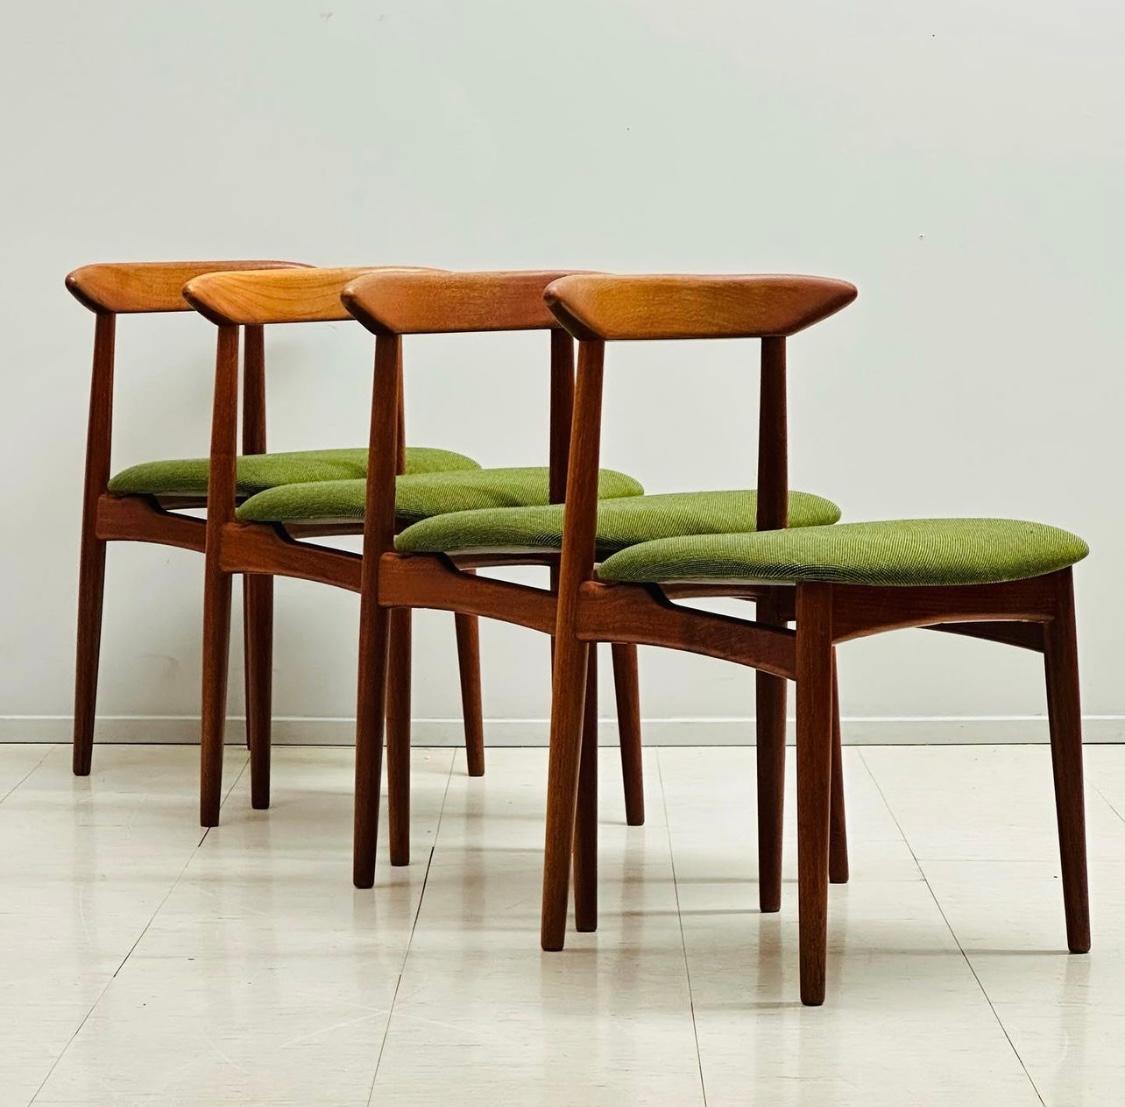 Set 4 Vintage Danish teak chairs by Arne Hovmand-Olsen for Mogens Kold, 1950s.
Elegant and sculptural chair in solid teak with beautifully restored wool fabric... Designed in 1951 as model MK310 by renowned Danish architect A. Hovmand Olsen. A very